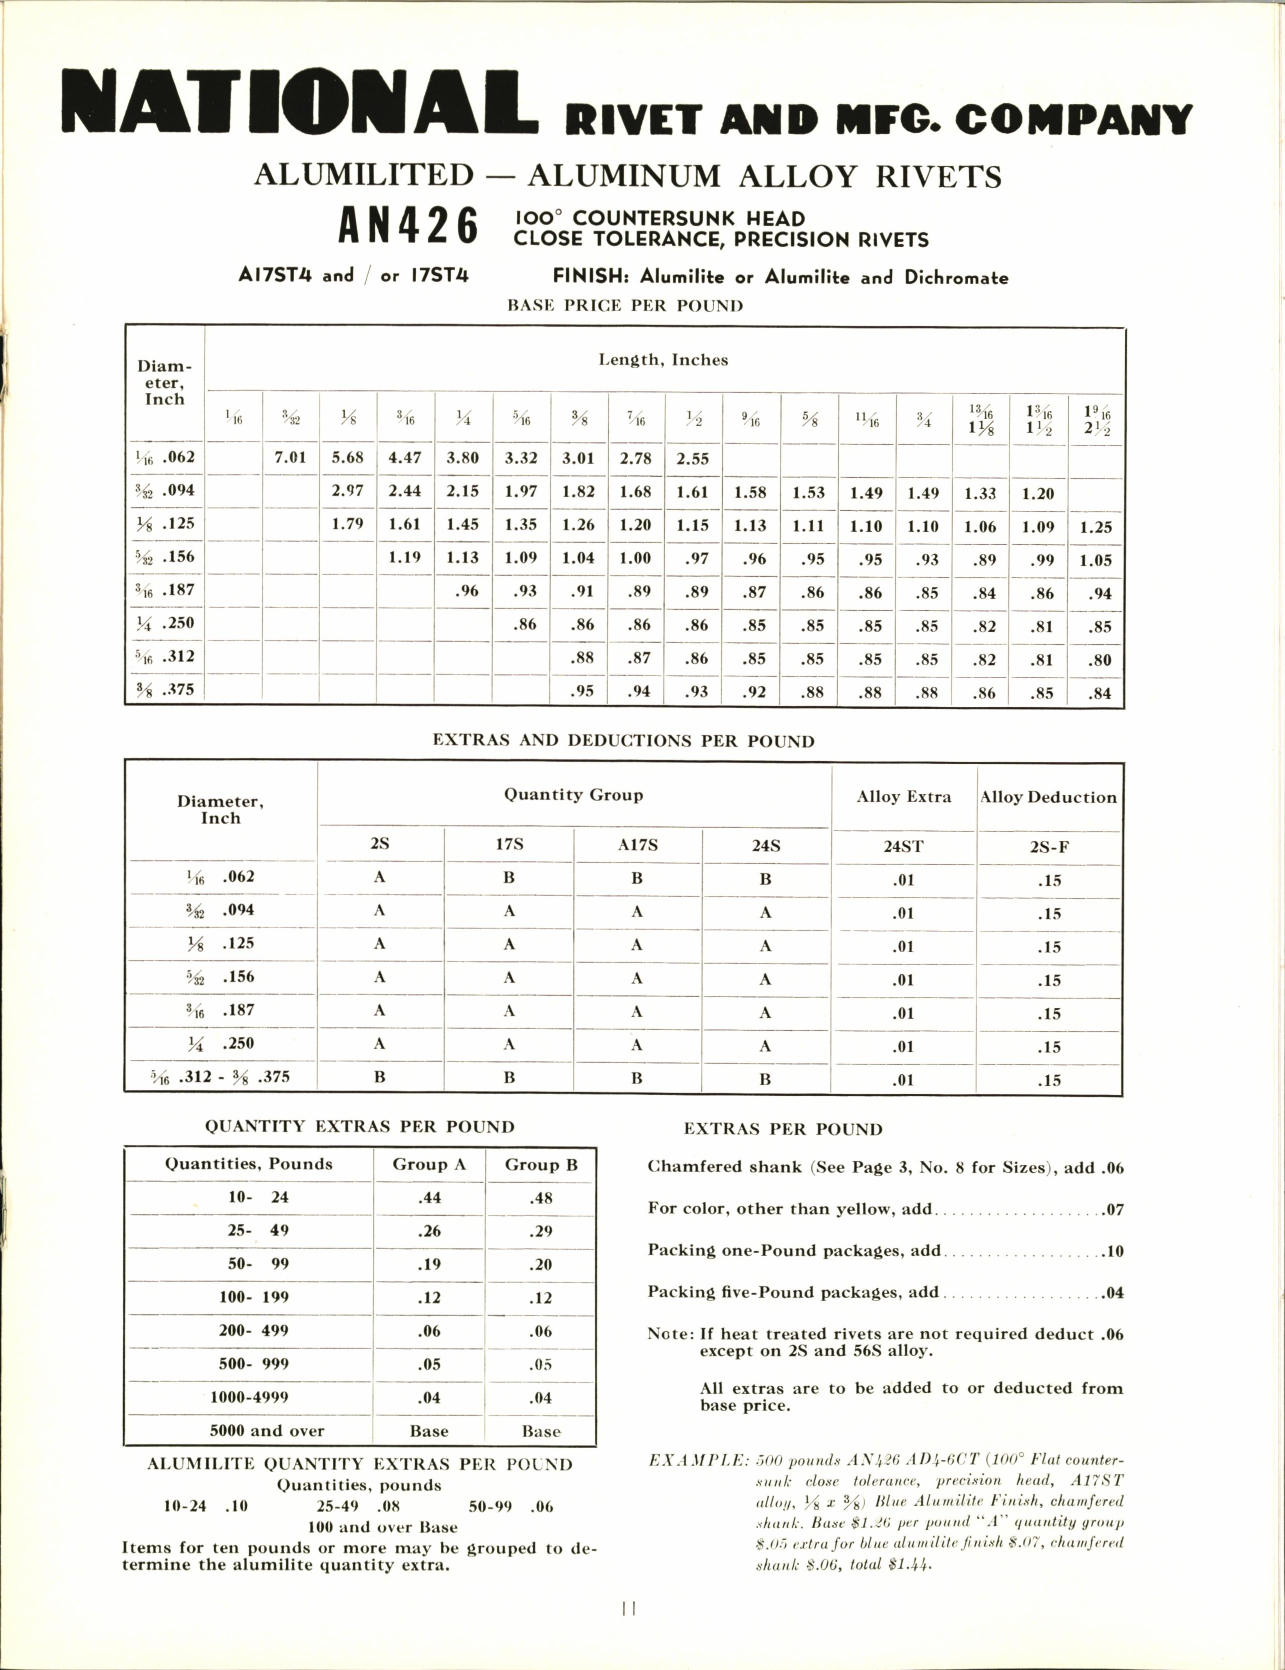 Sample page 12 from AirCorps Library document: Aircraft Solid Rivets - National Rivet & Mgf Co